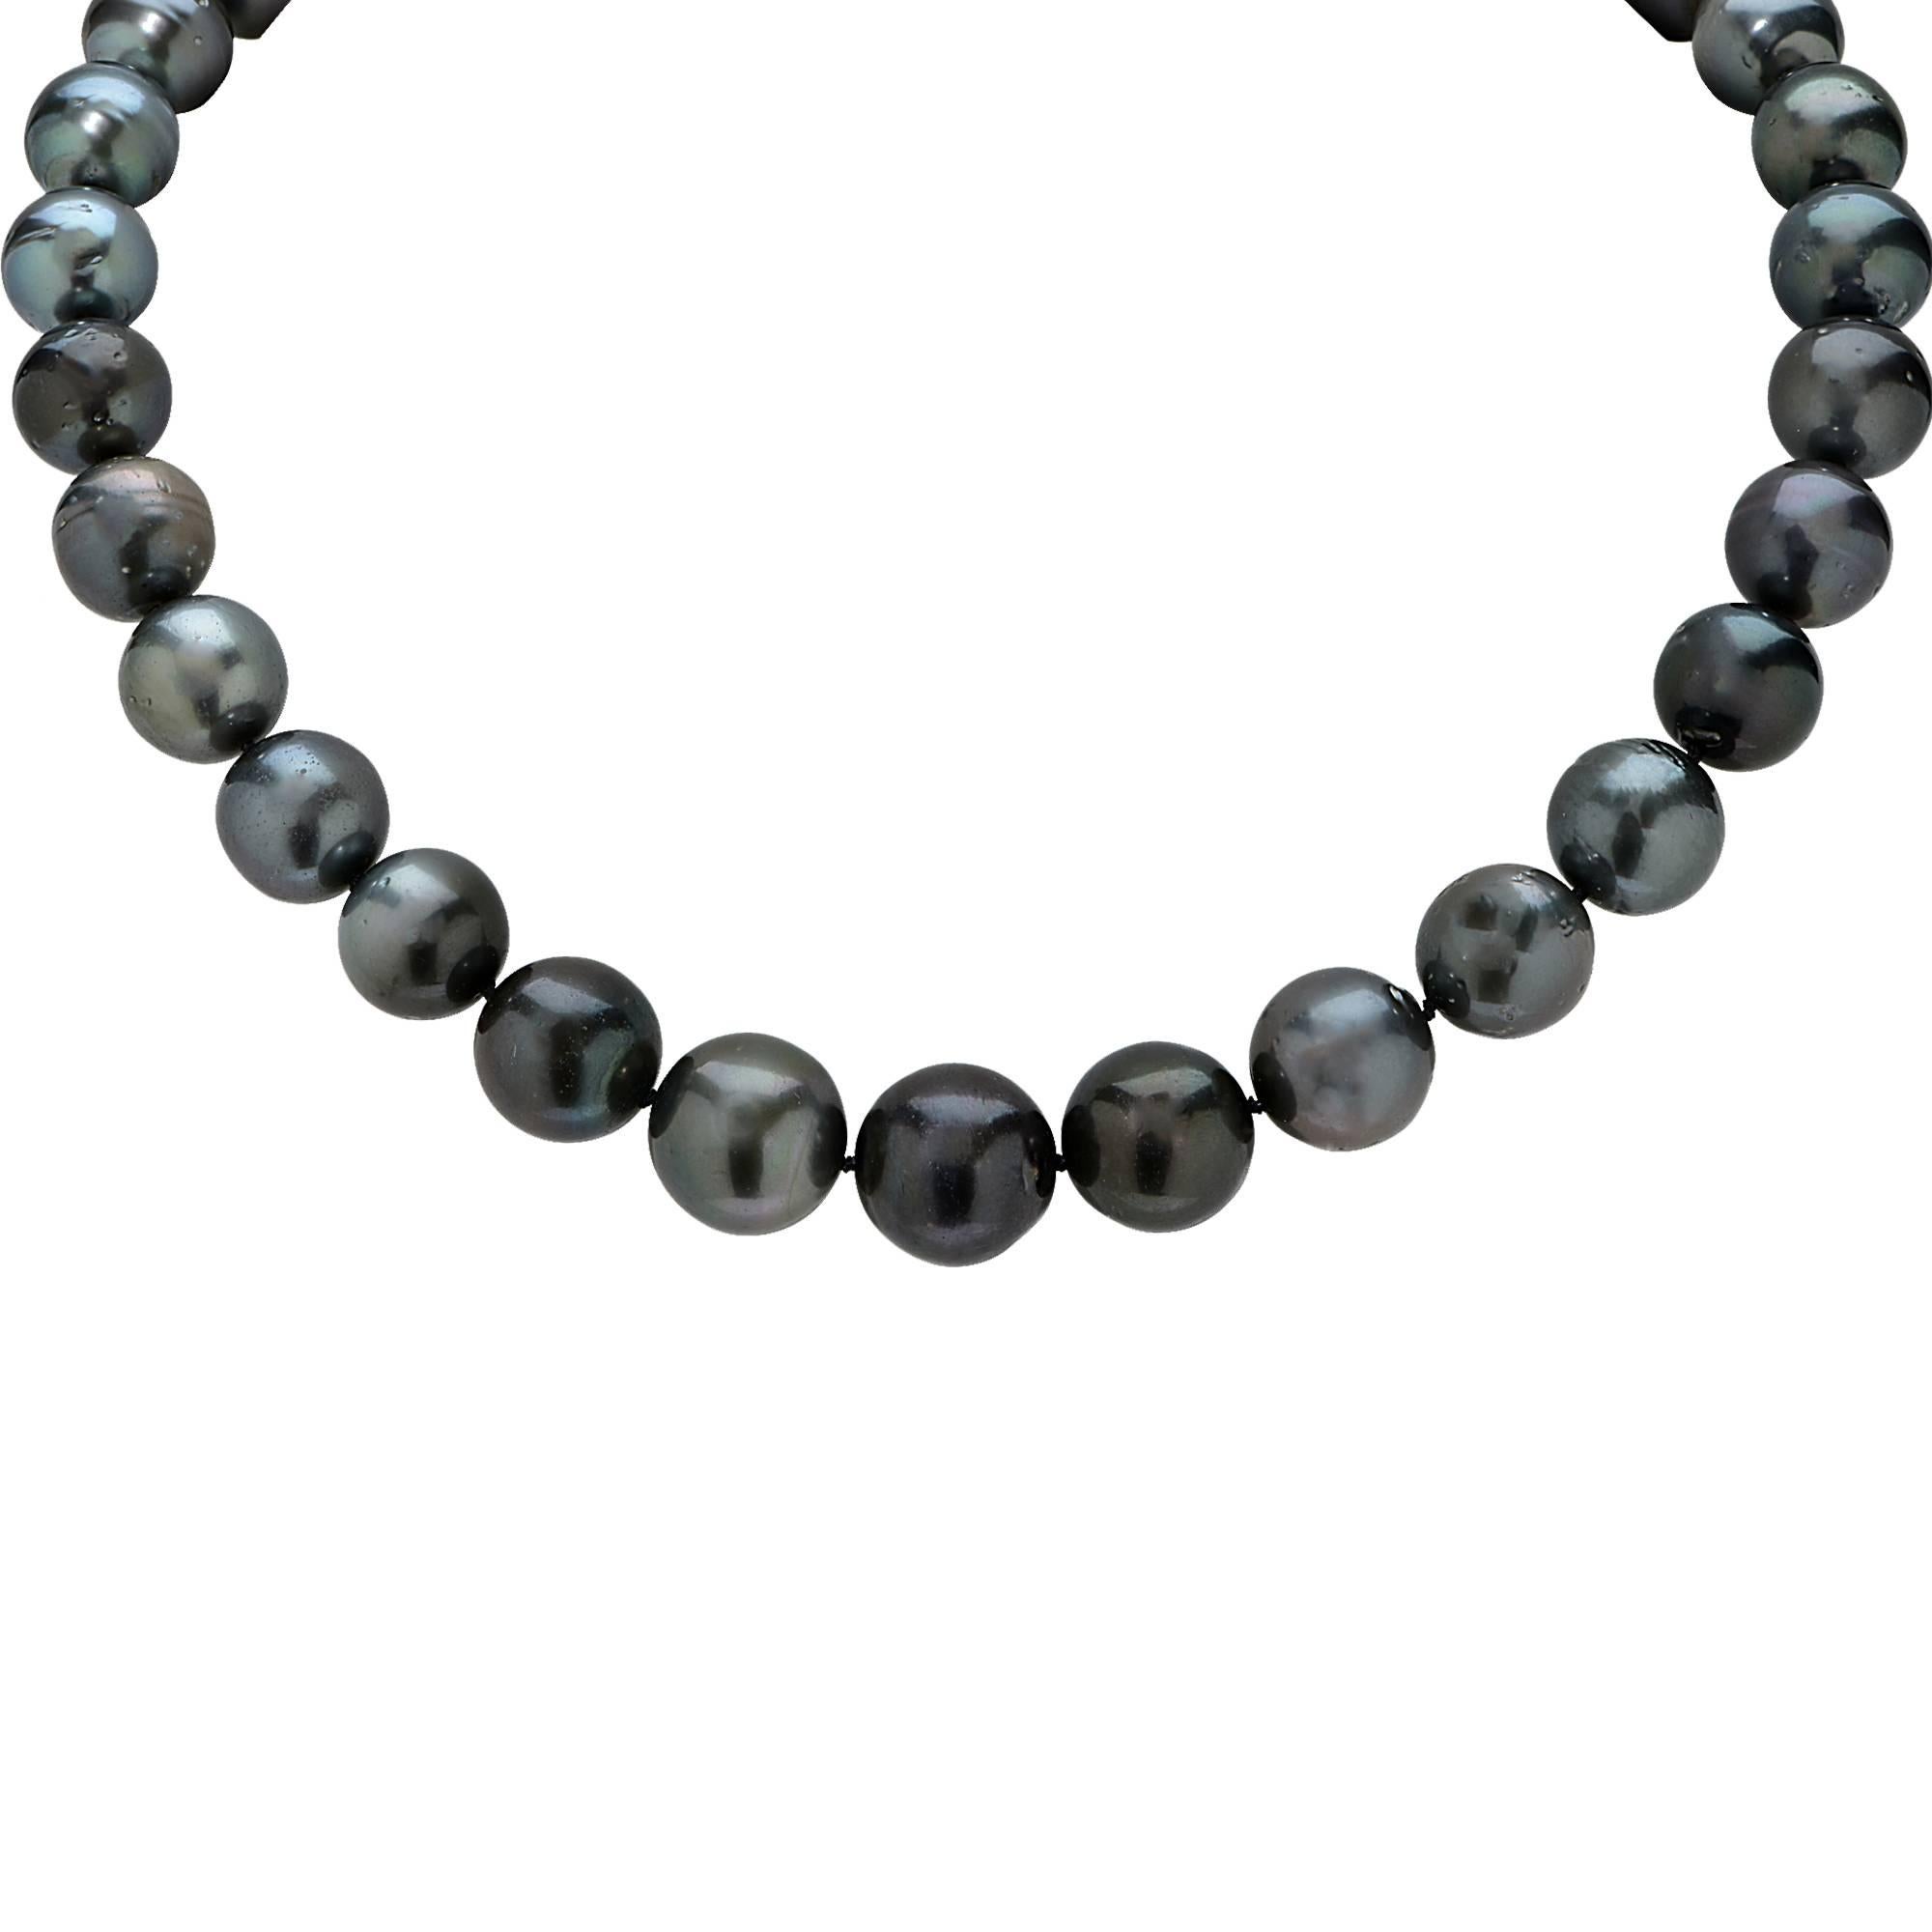 This beautifully crafted pearl necklace features 12-16mm South Sea black pearls with a 14k white gold clasp. Black South Sea pearls are famed for their mysterious and breath-taking overtones. So mysterious in fact, there have been stories and tales